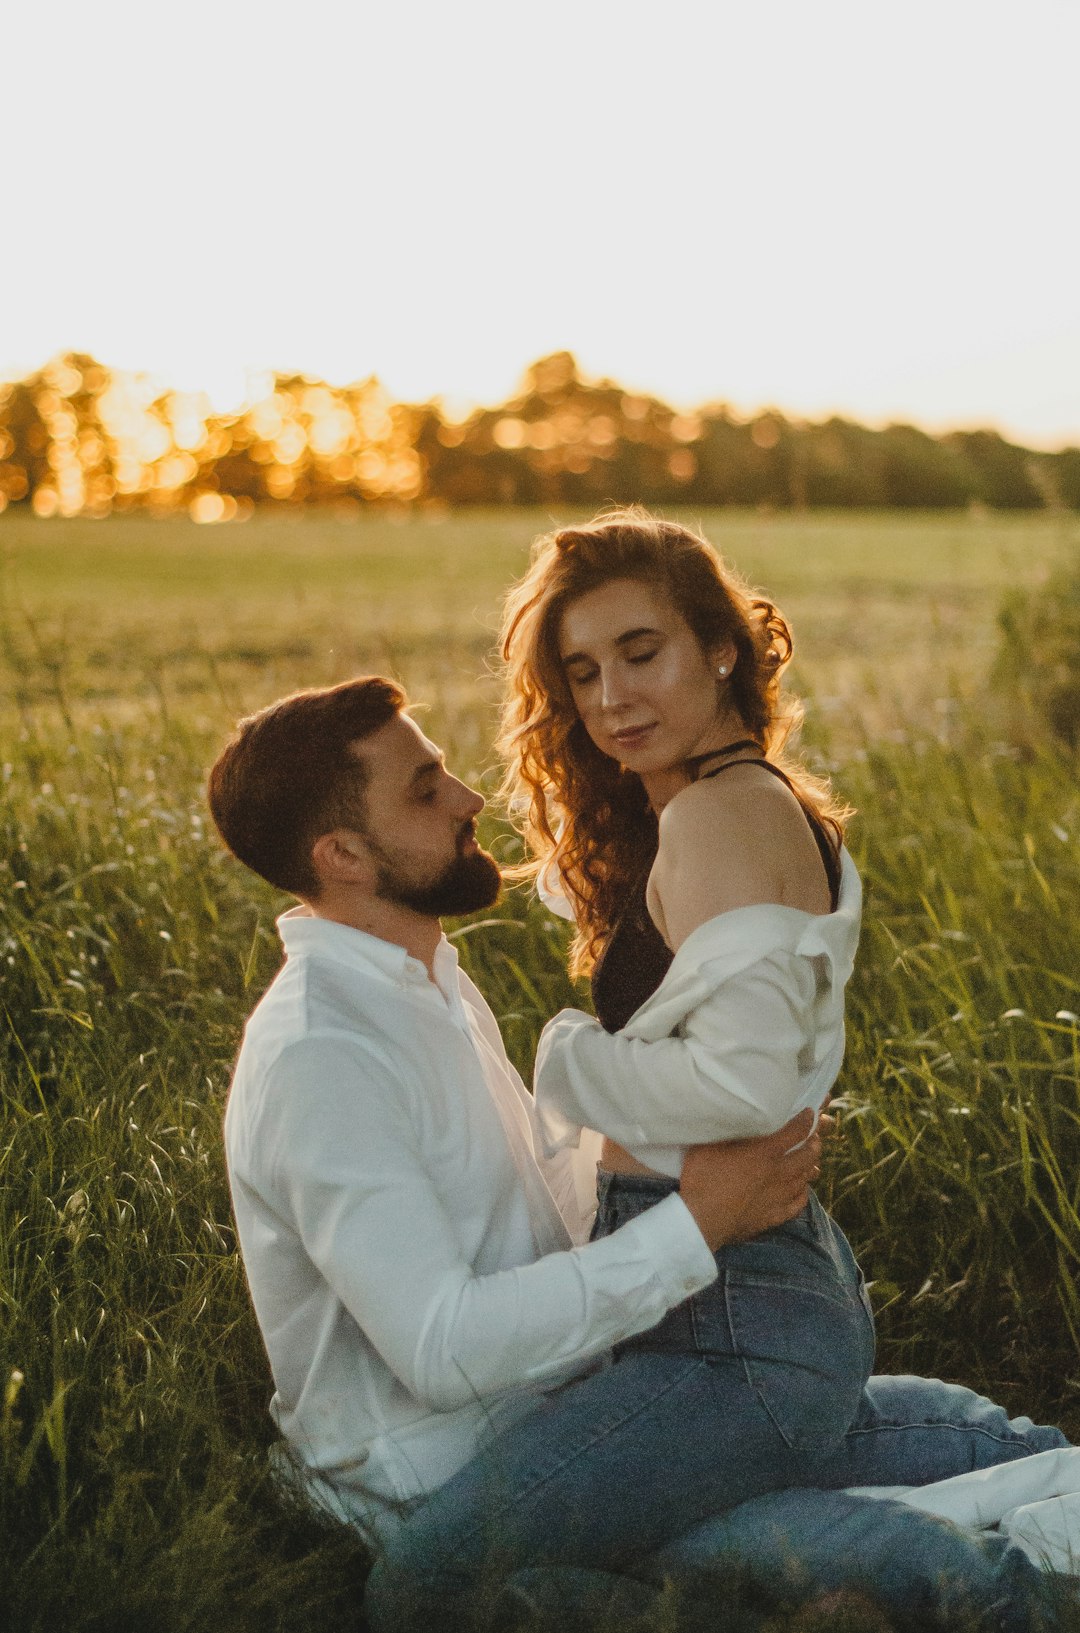 man in white dress shirt kissing woman in blue denim jeans on green grass field during